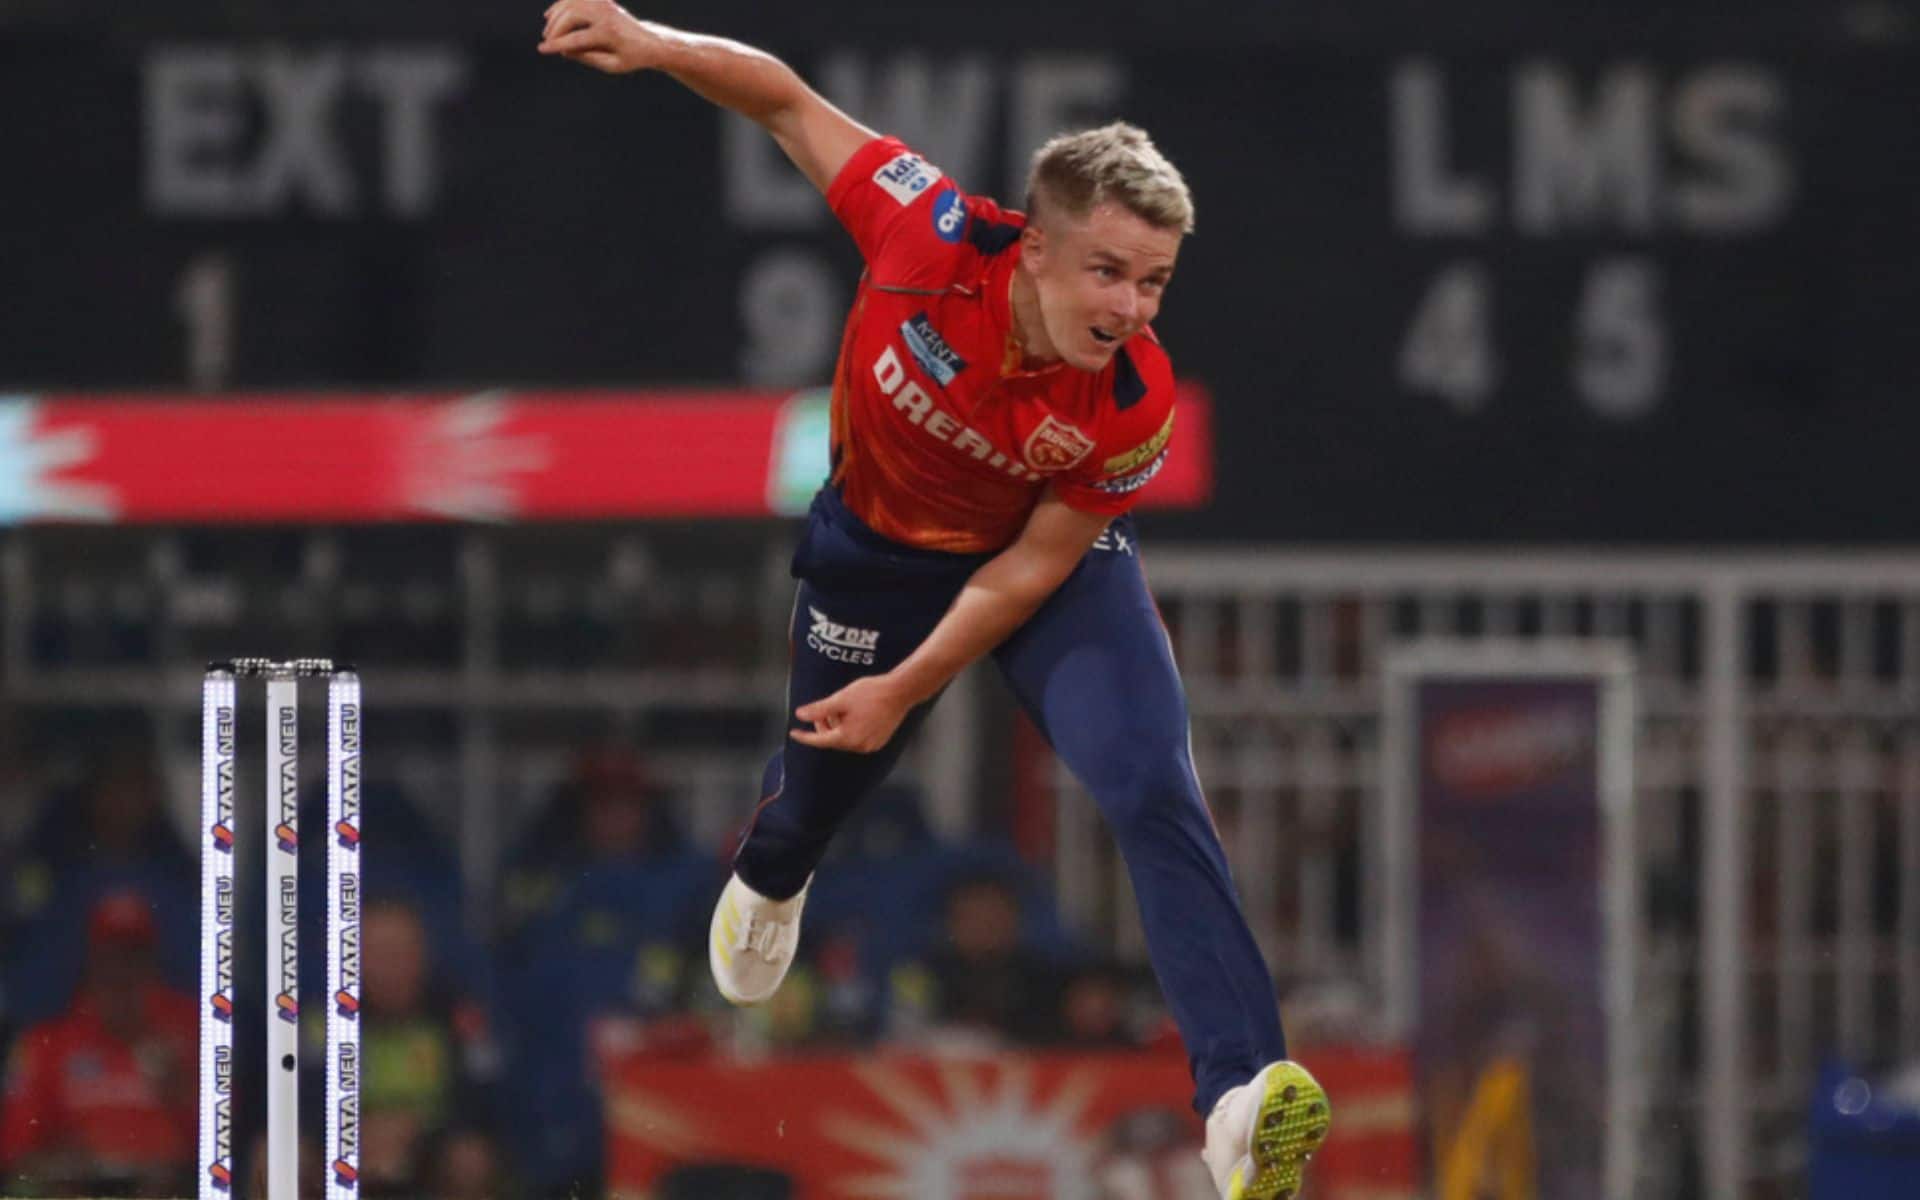 Sam Curran could be pretty effective on the NMS wicket [iplt20.com]